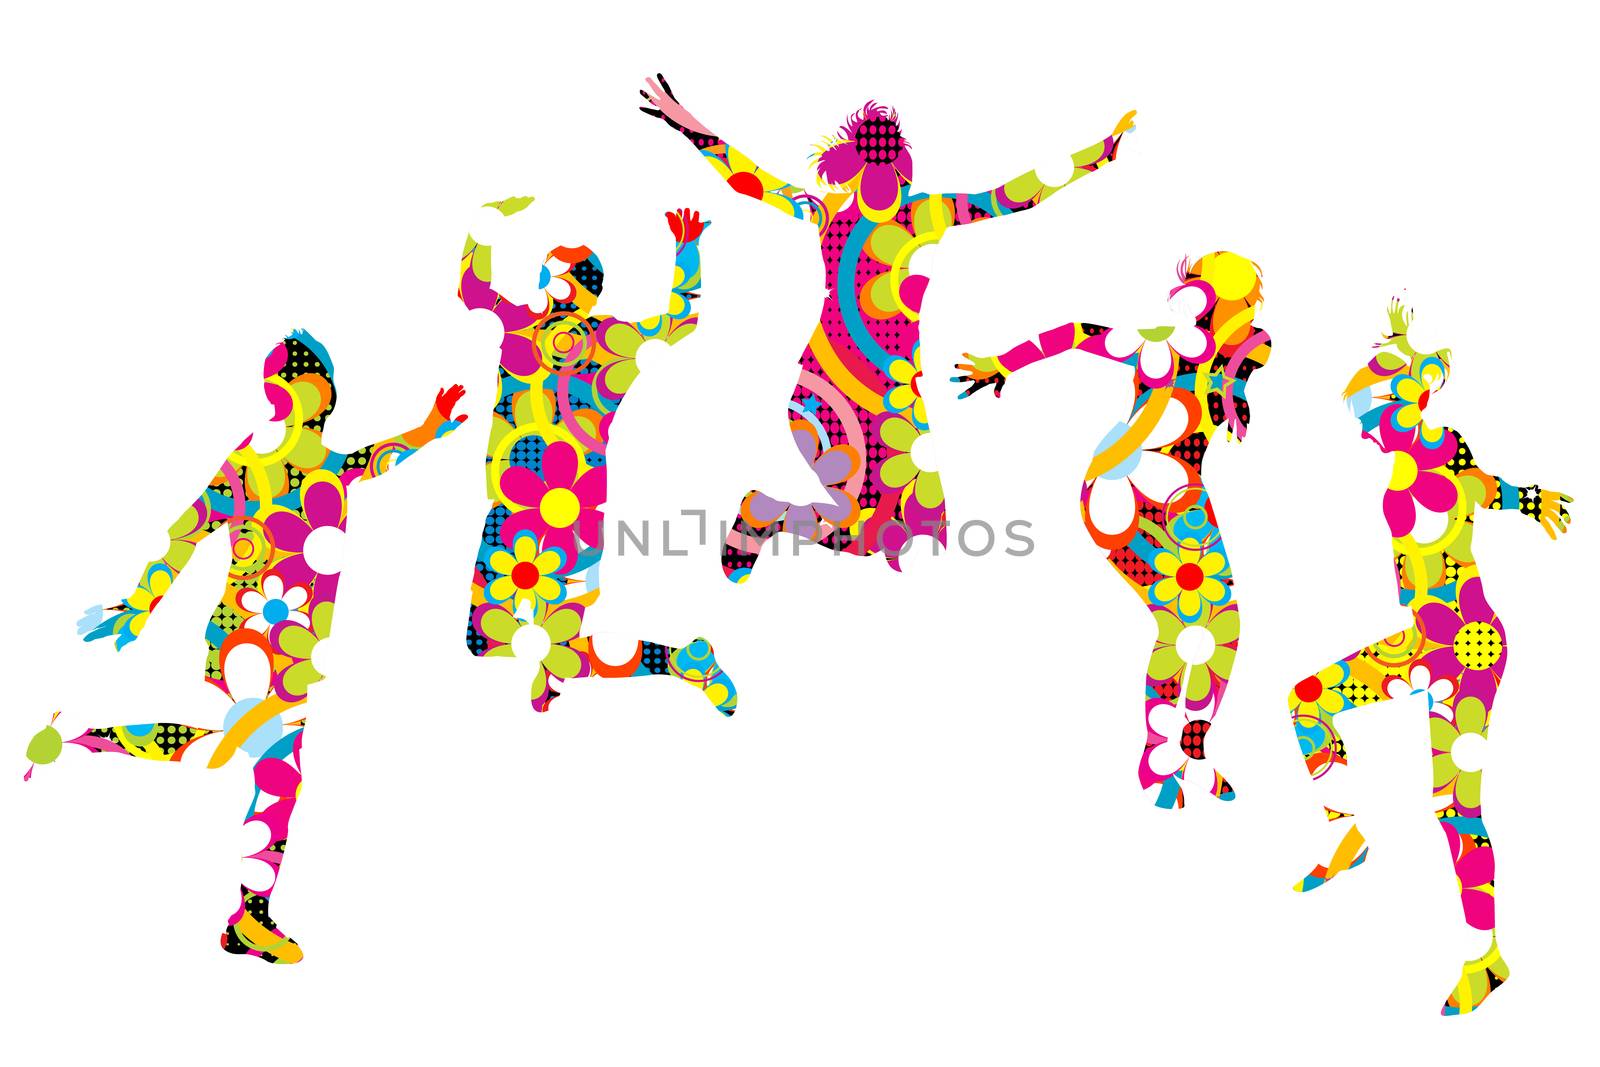 Floral patterned young people silhouettes jumping